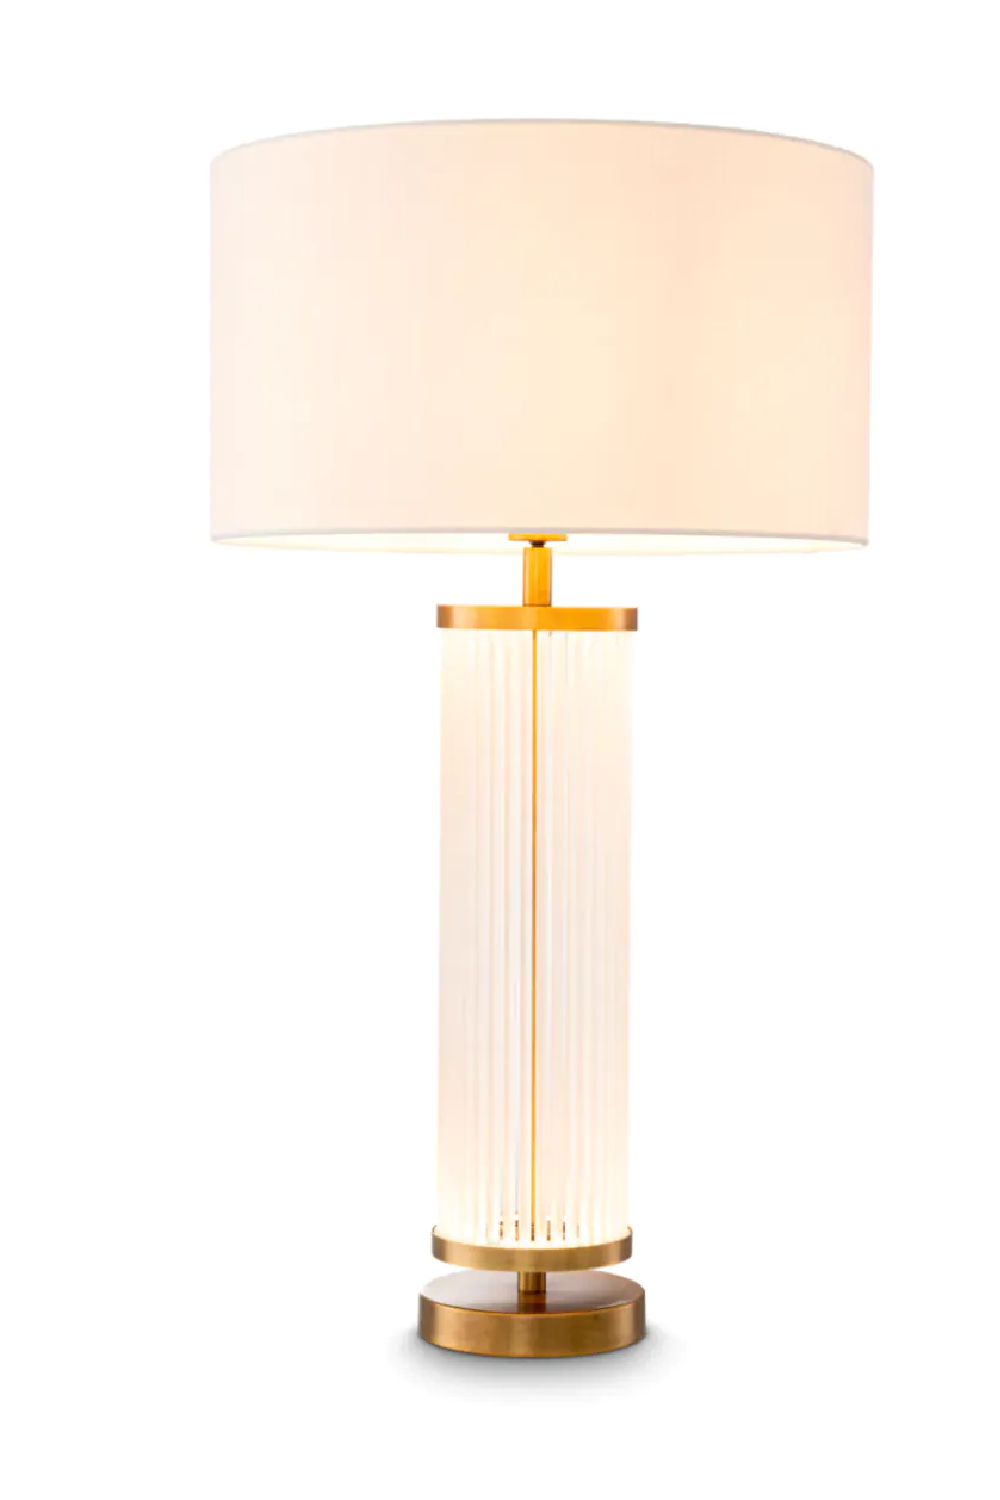 Frosted Glass Table Lamp | Eichholtz Thibaud | Oroa.com